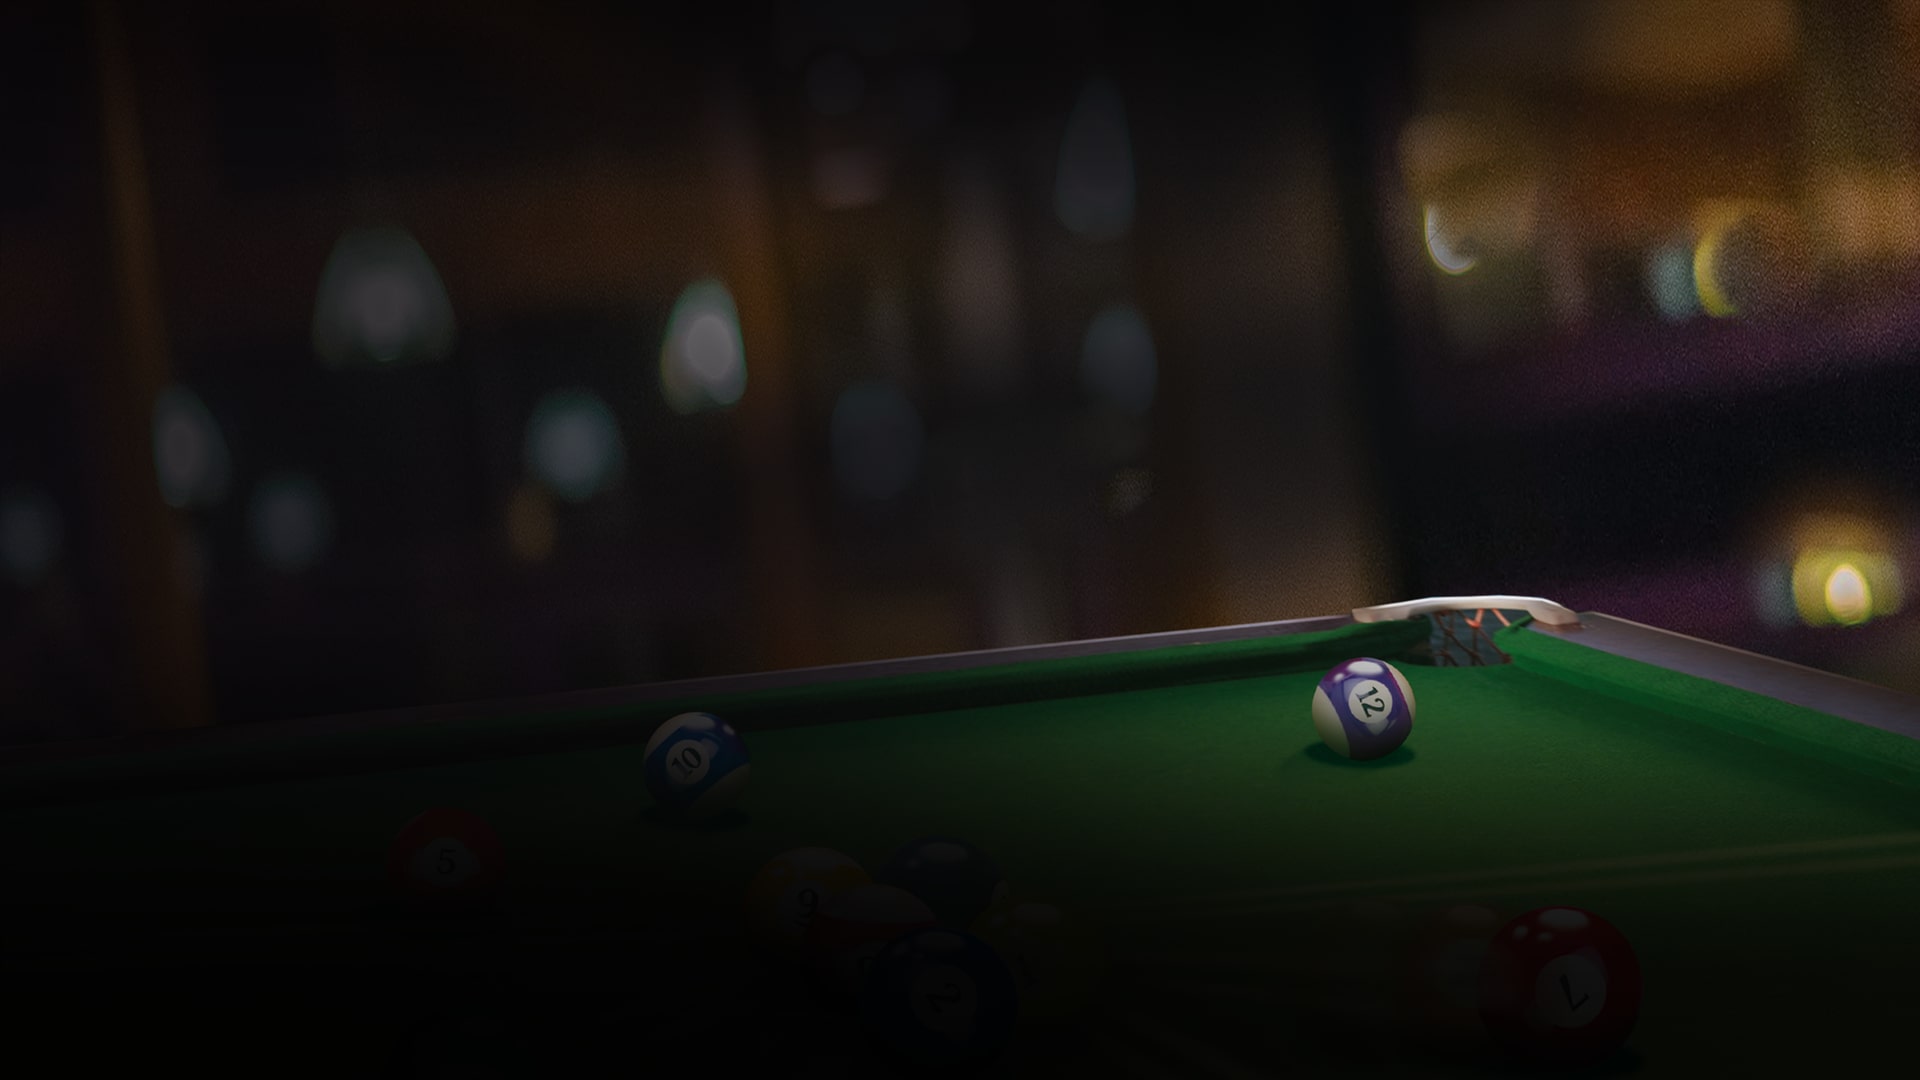 3D Billiards: Pool and Snooker Remastered GameStop Exclusive - PlayStation 5